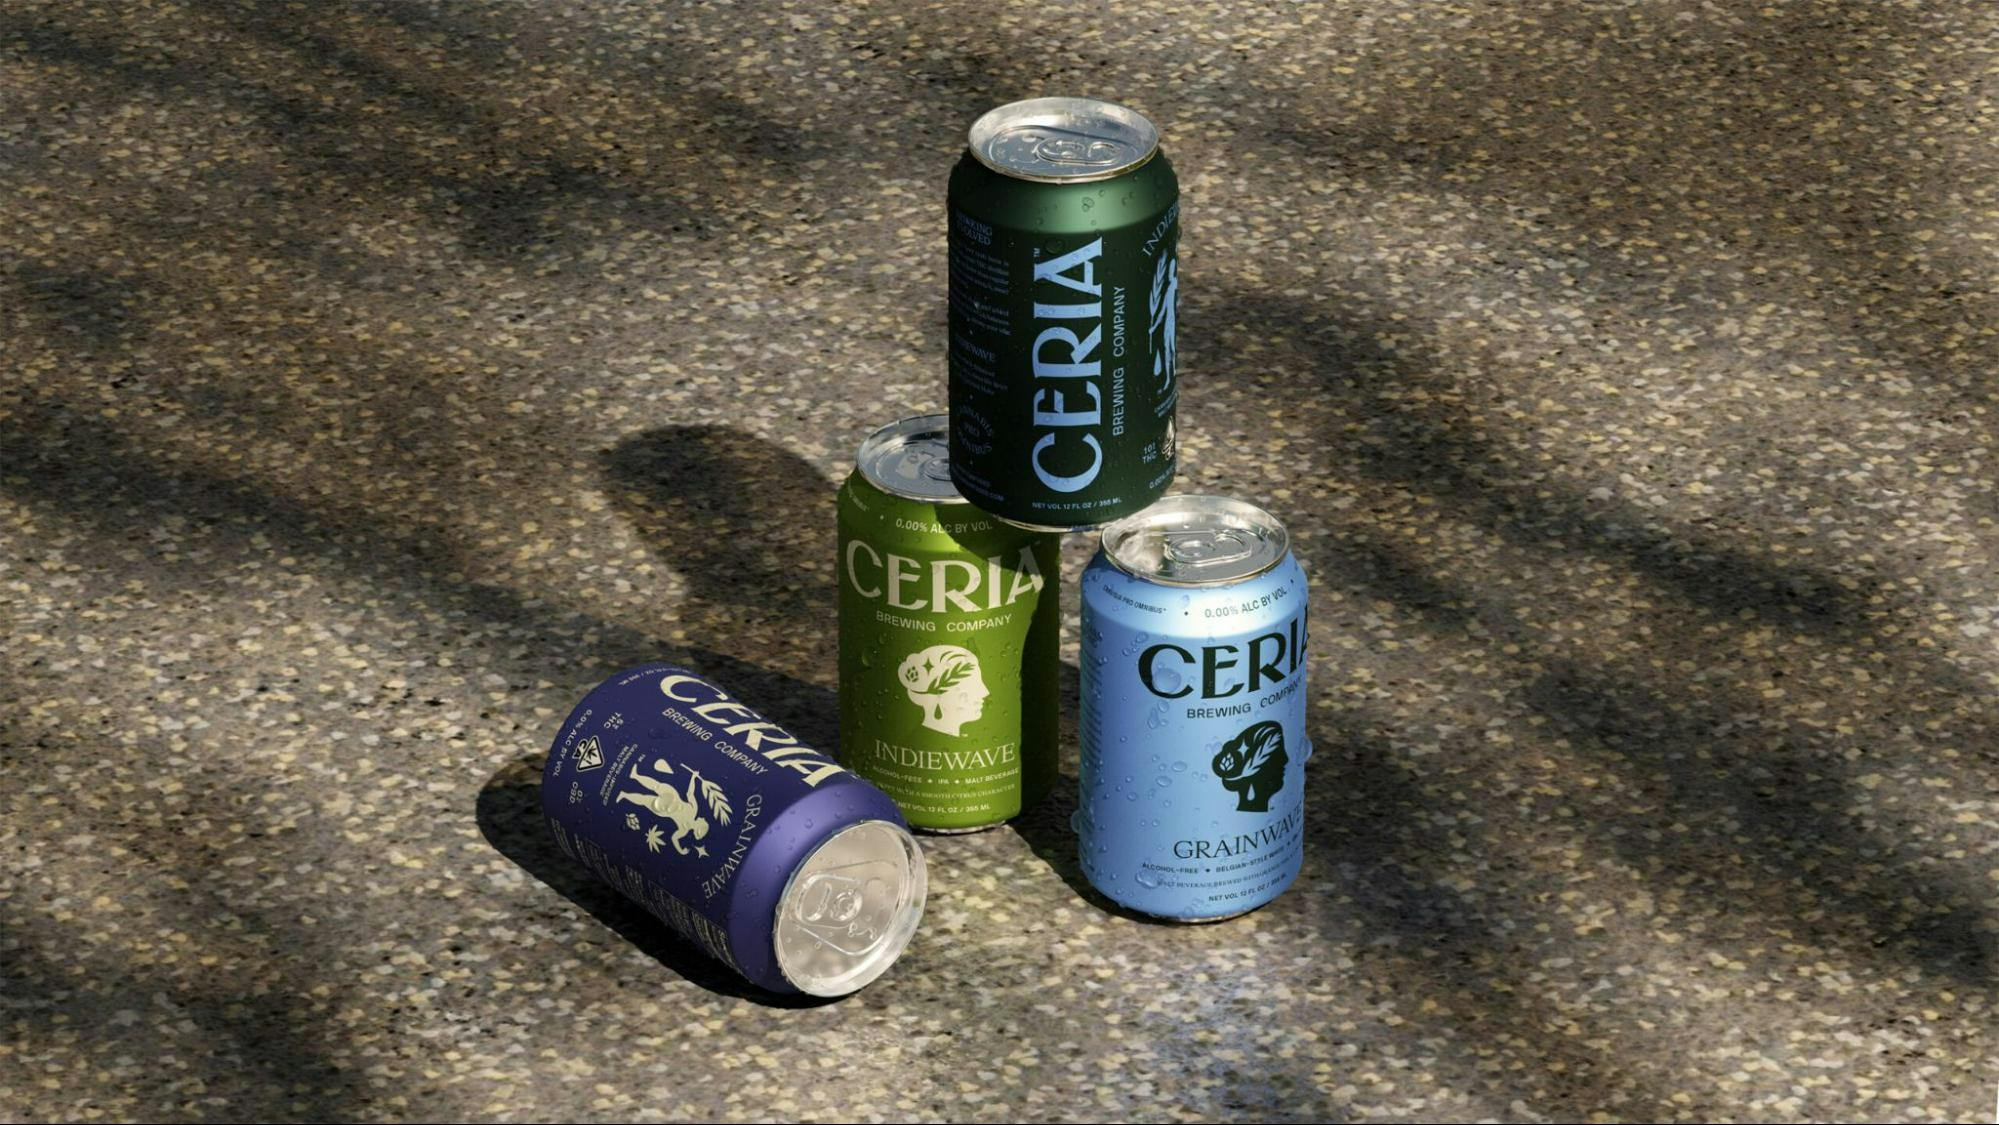 Ceria beer cans by Mother Design